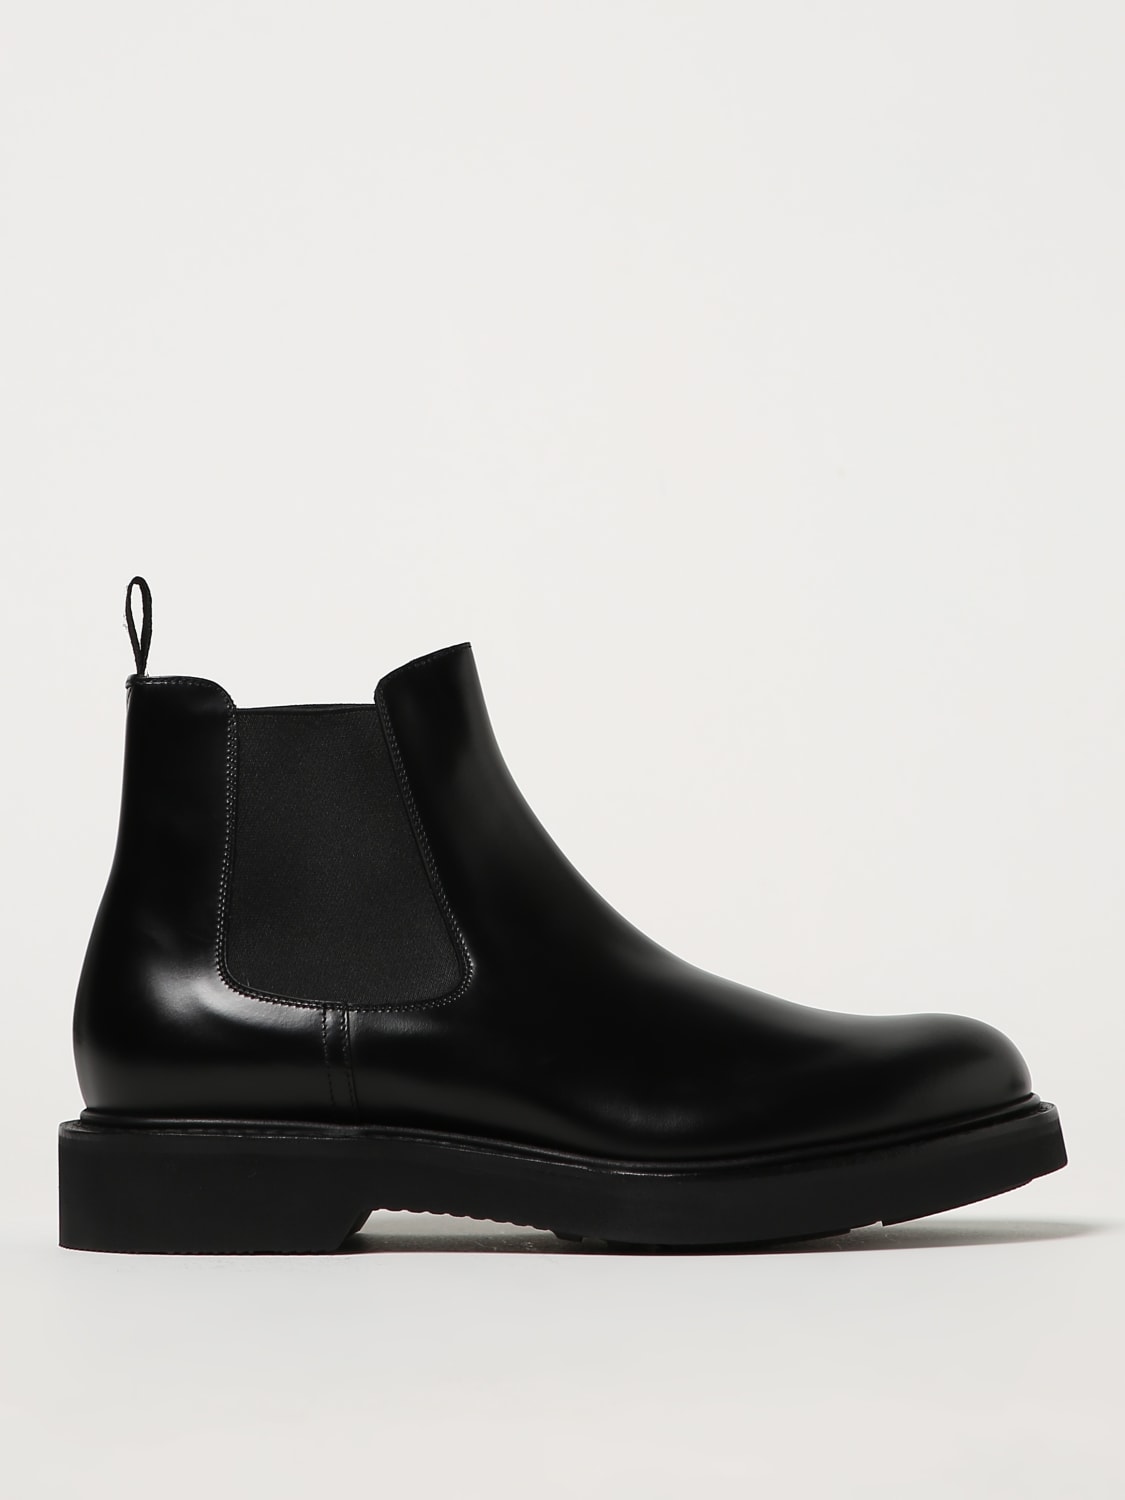 CHURCH'S: Leicester leather ankle boots - Black | CHURCH'S boots ...